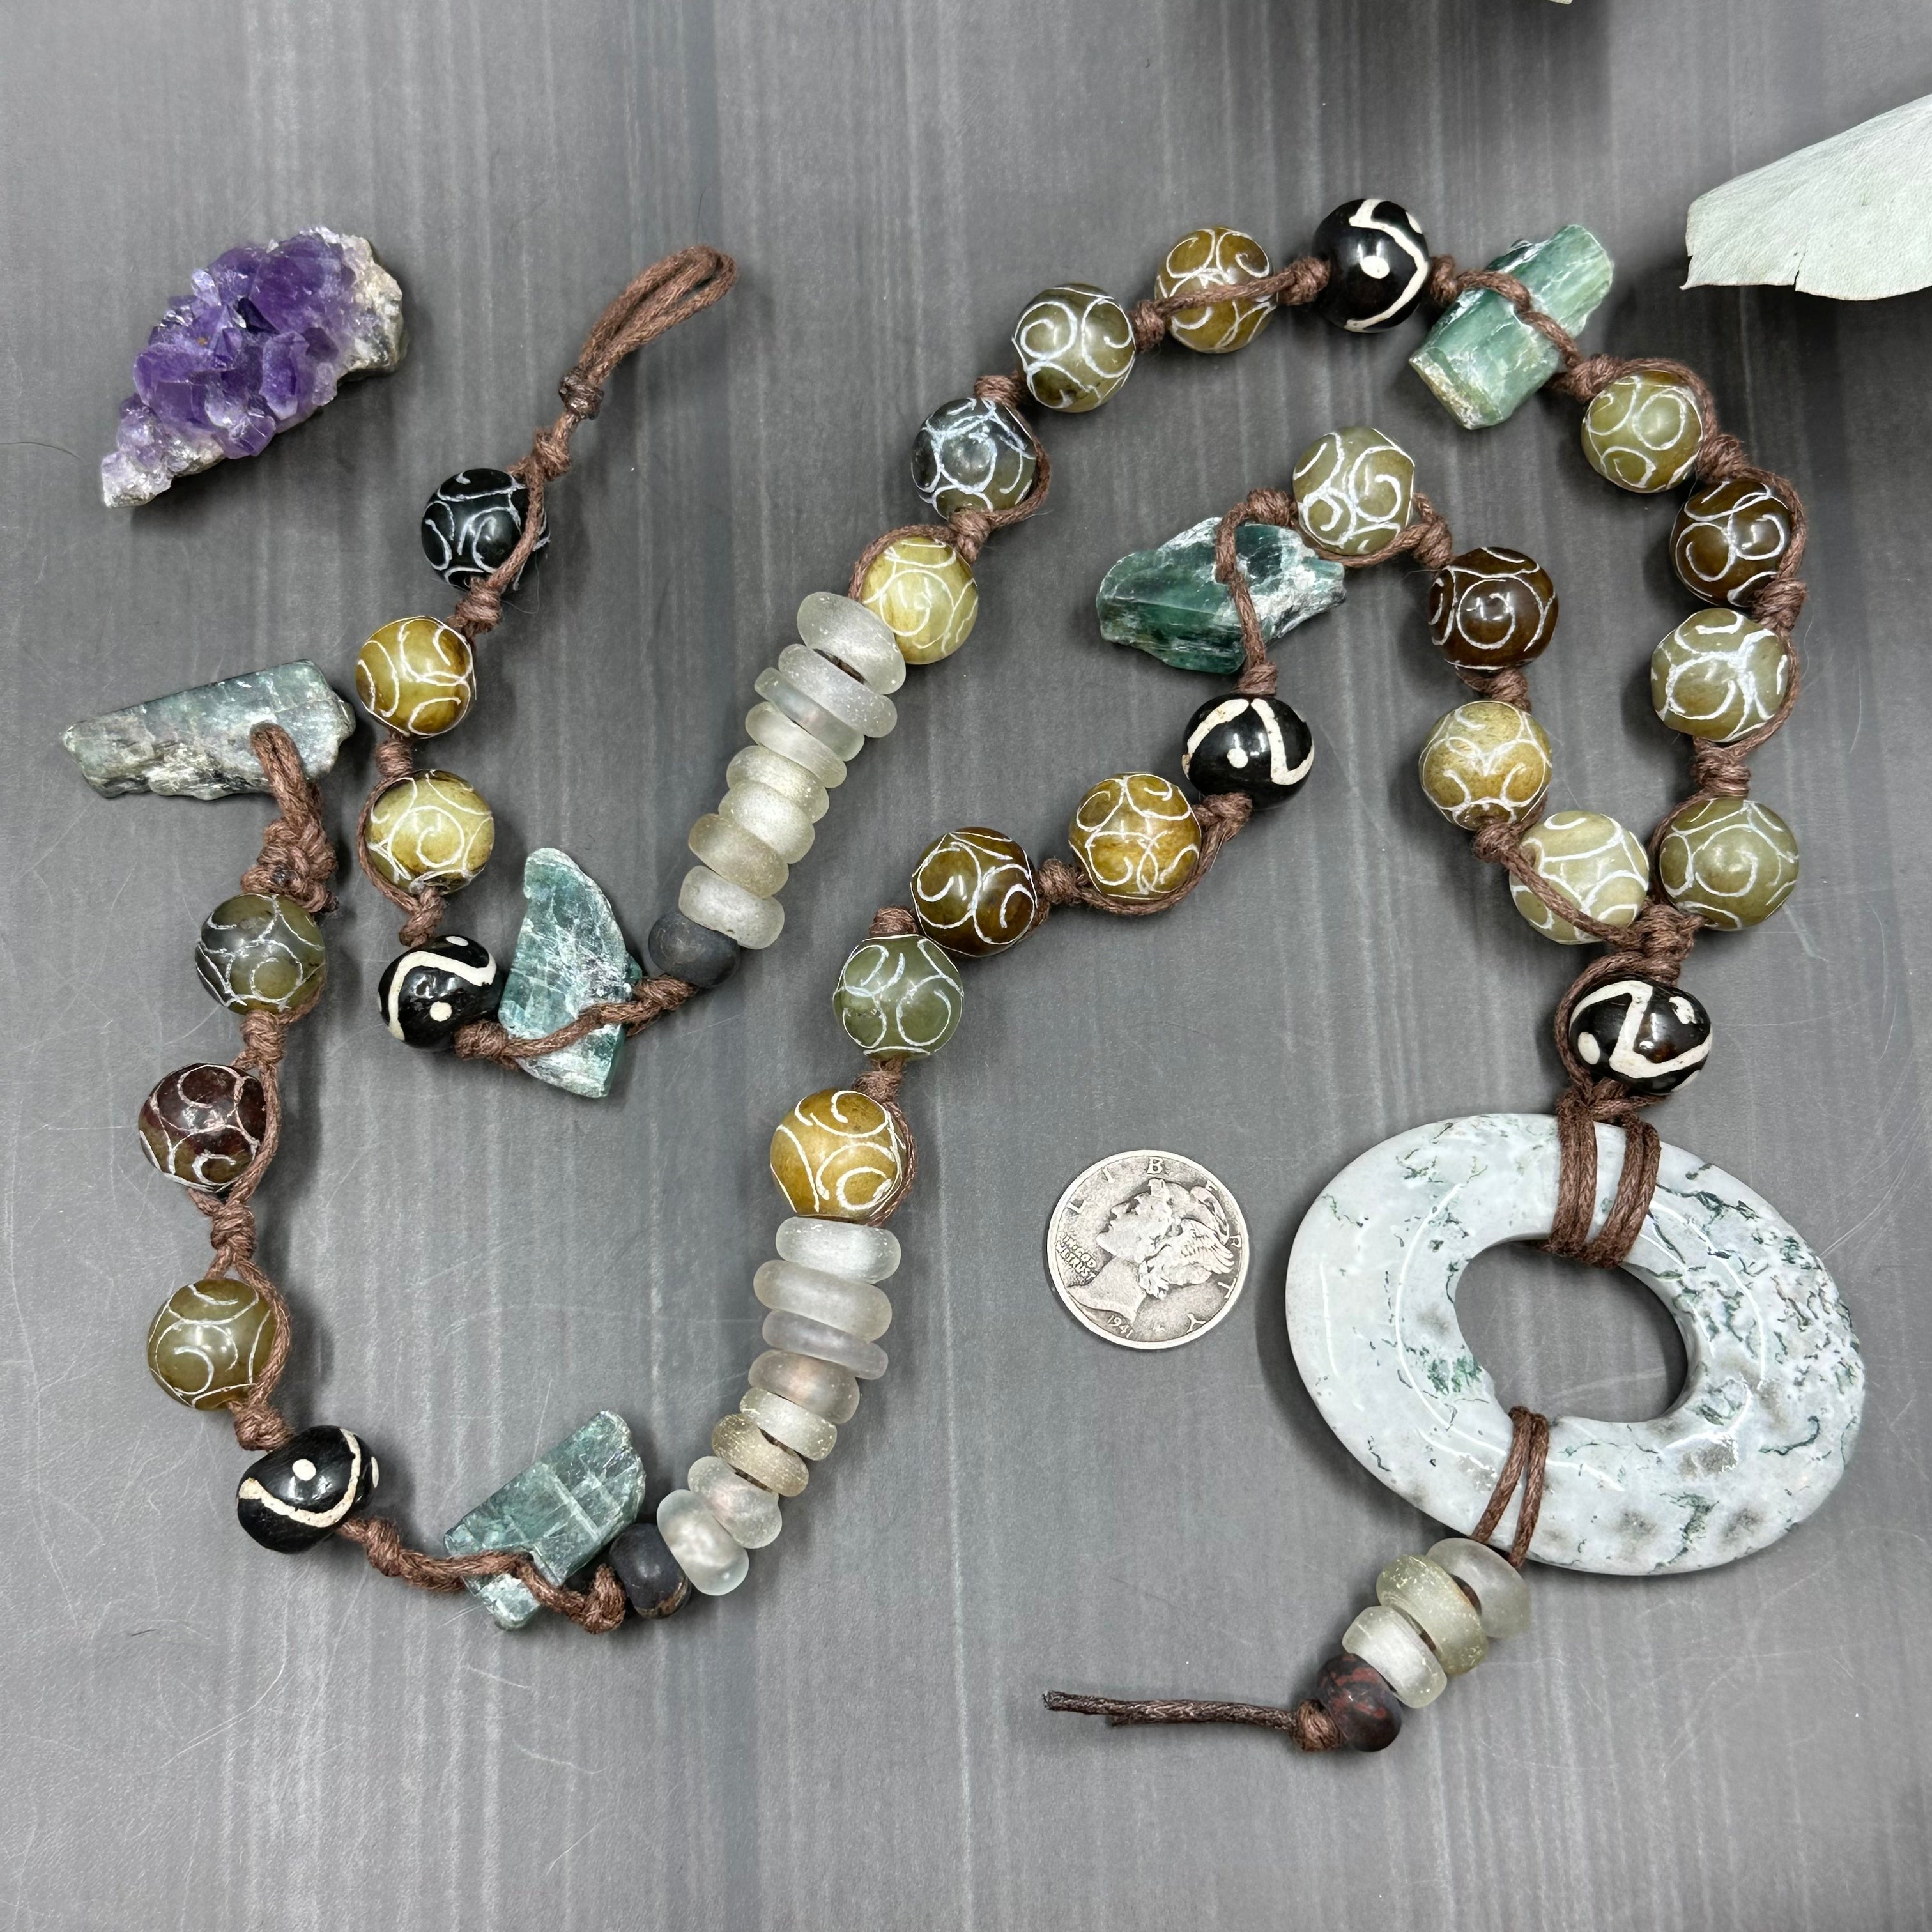 Carved Jade, Kyanite, Trade bead, and moss agate statement necklace